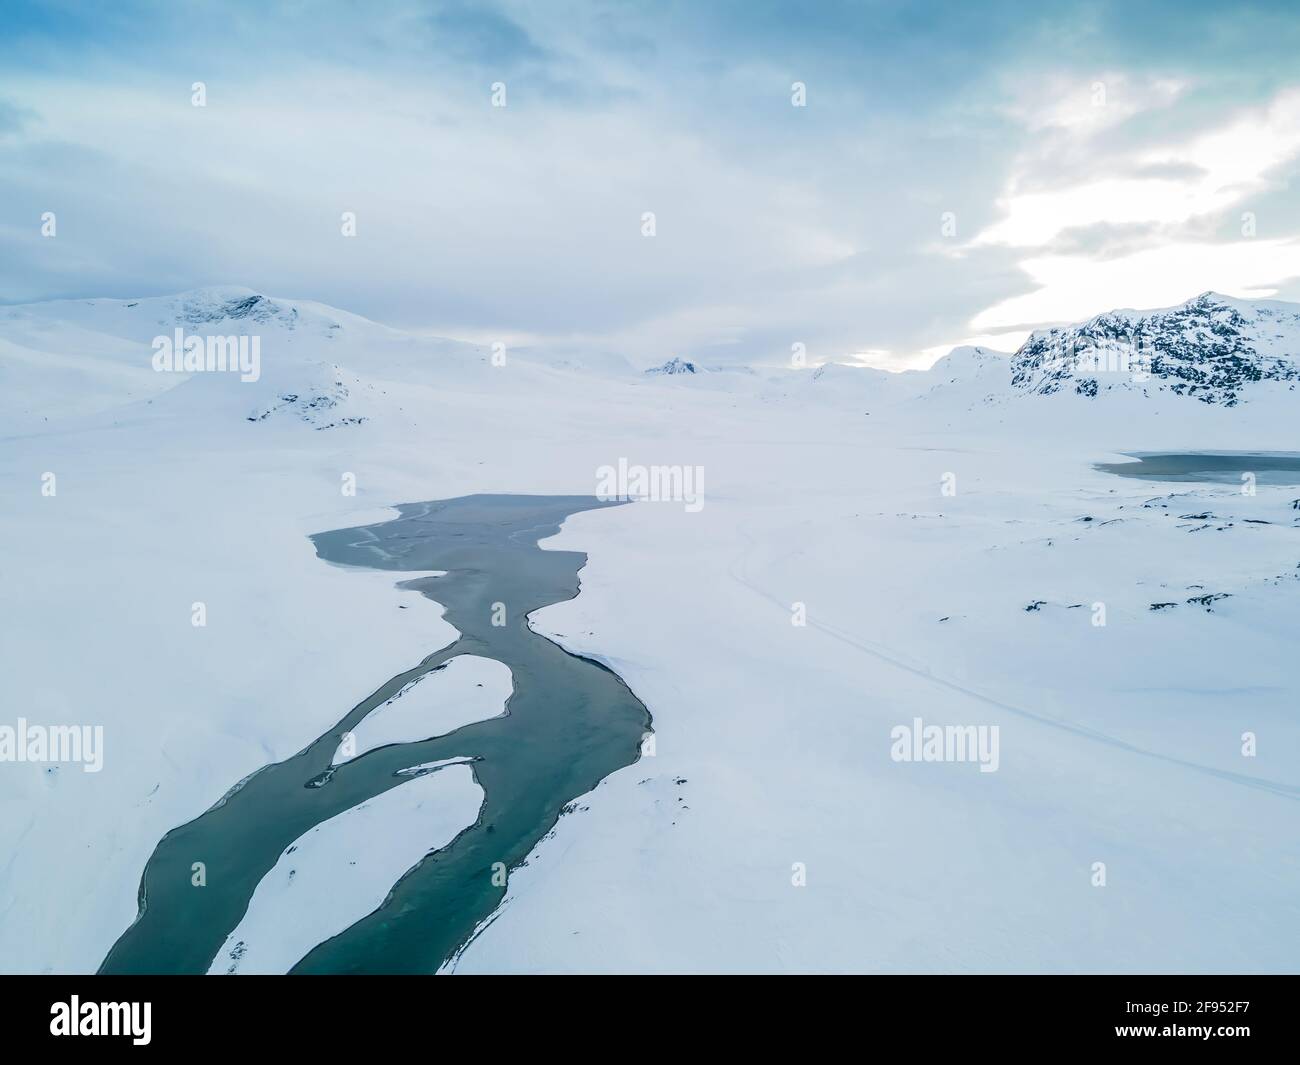 Stunning aerial view of a river flowing through a snow covered tundra. Stock Photo